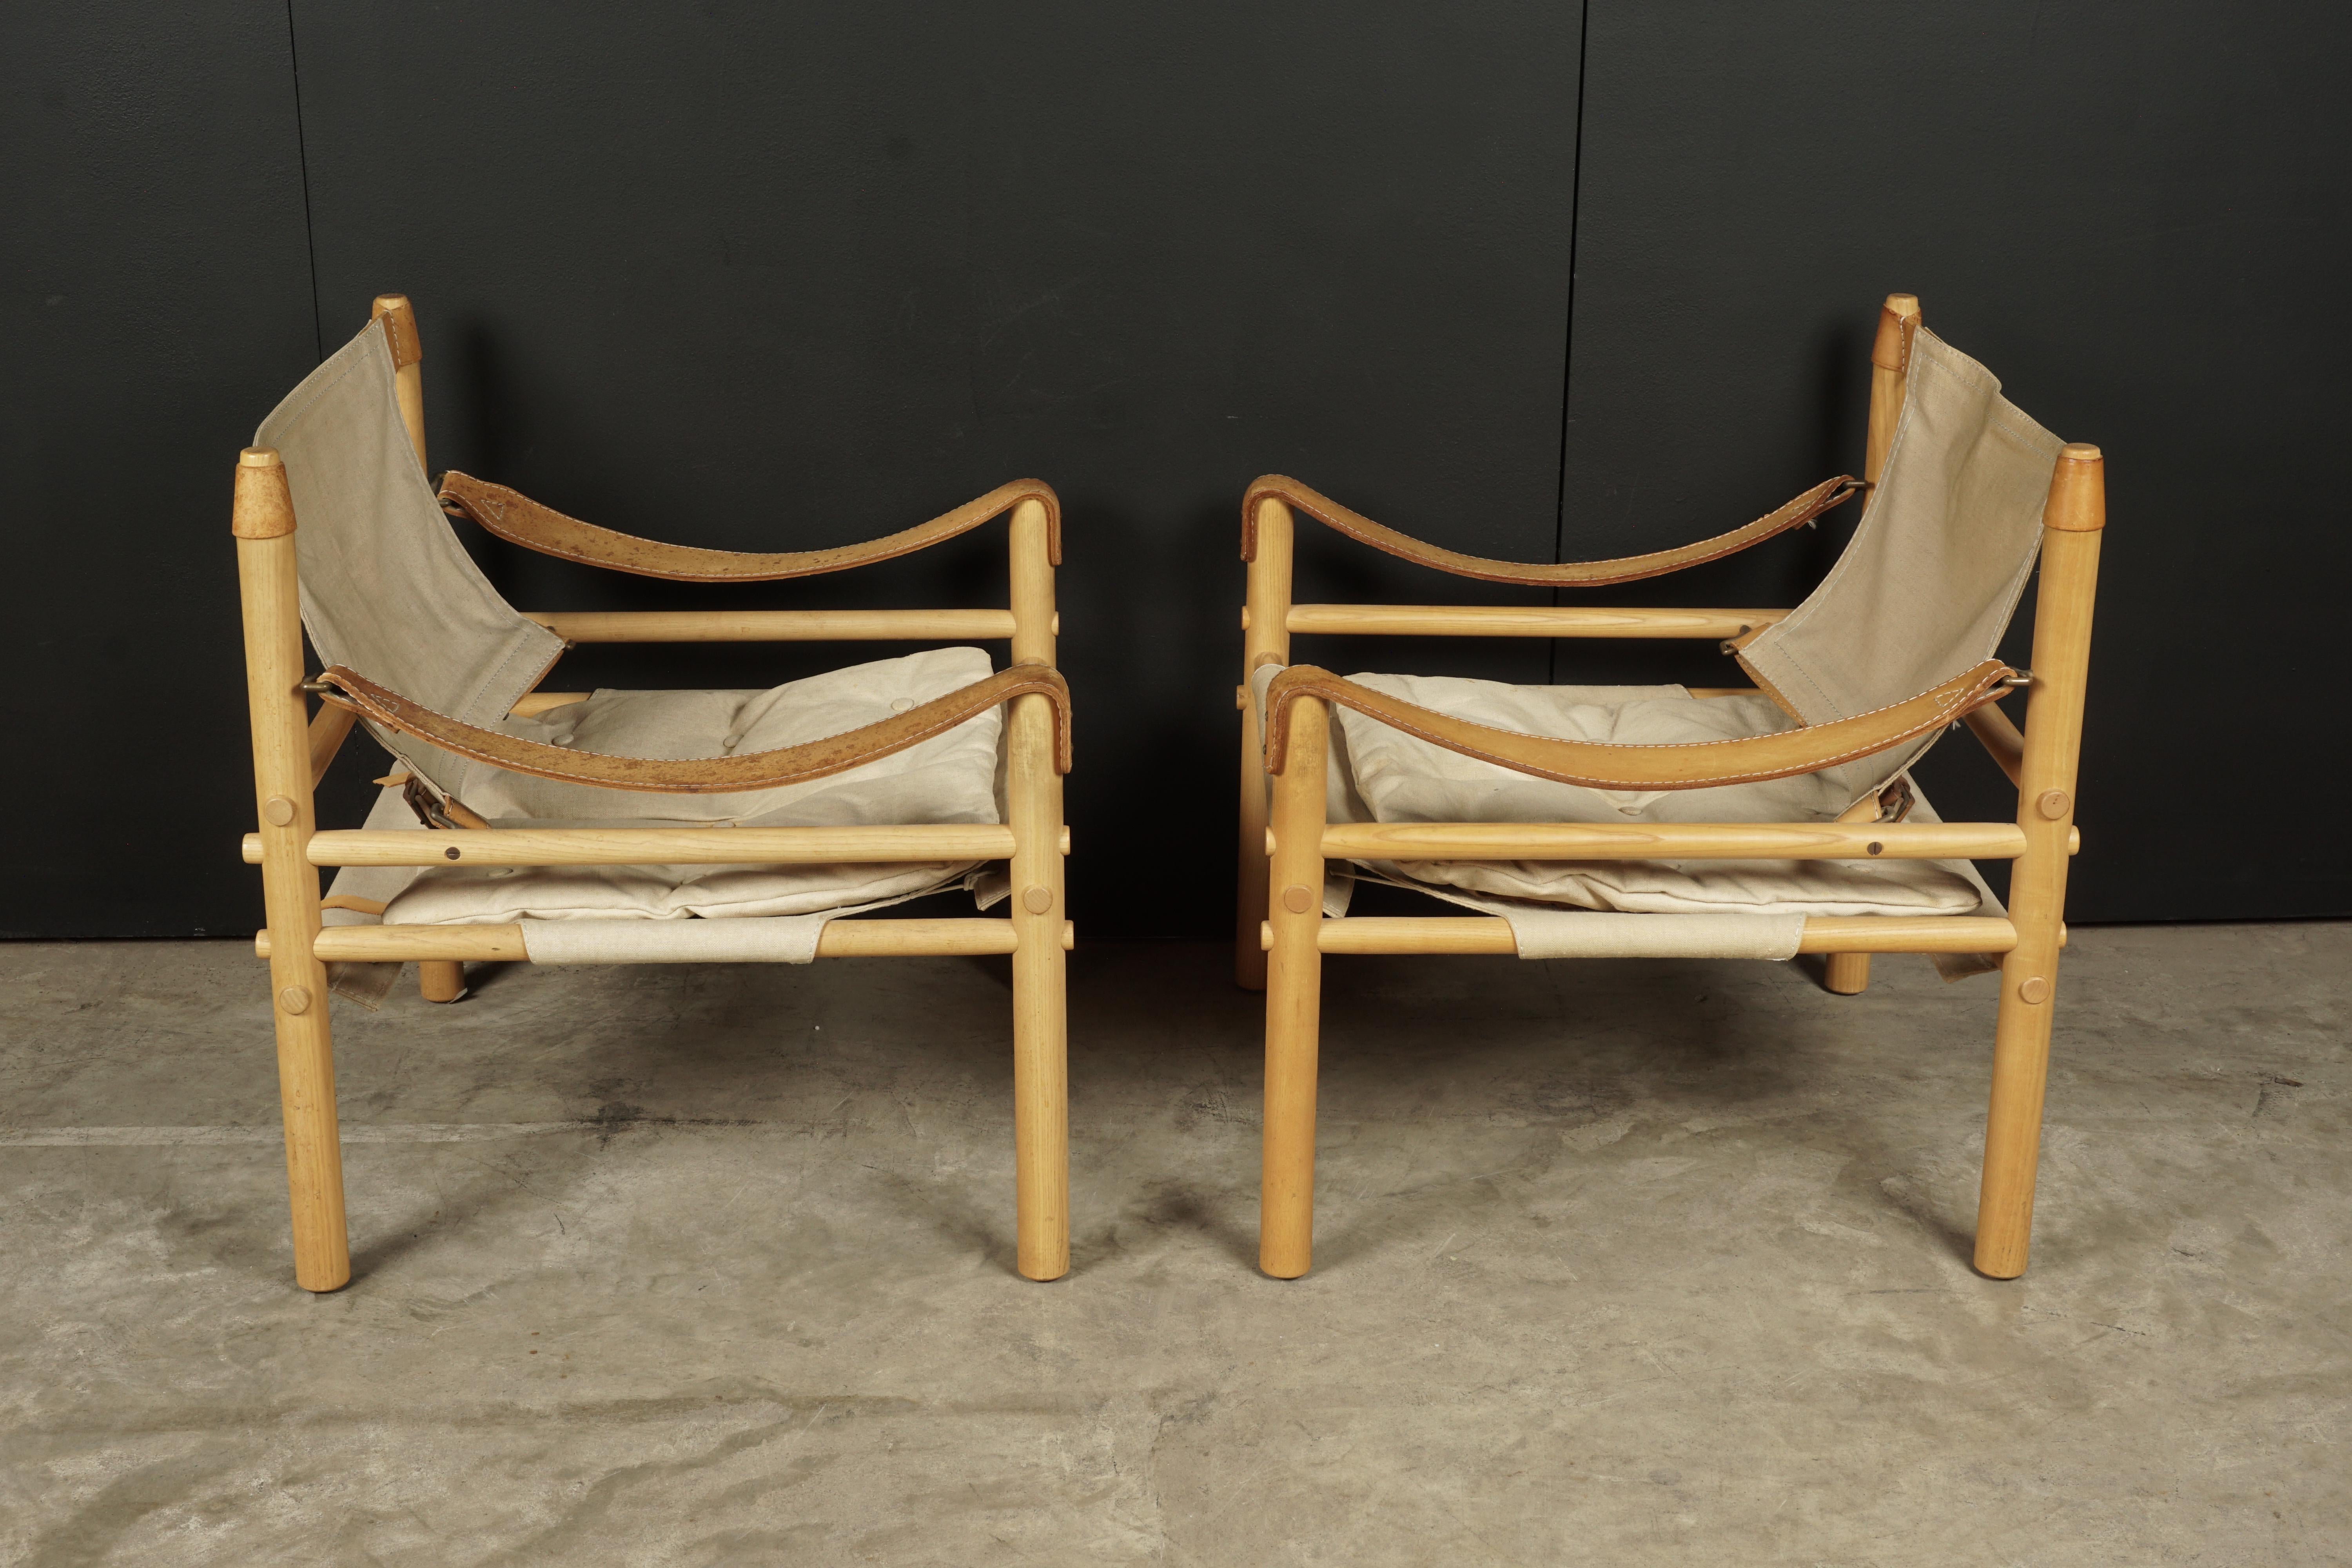 European Pair of Arne Norell Lounge Chairs, Model Sirocco, Sweden, circa 1970